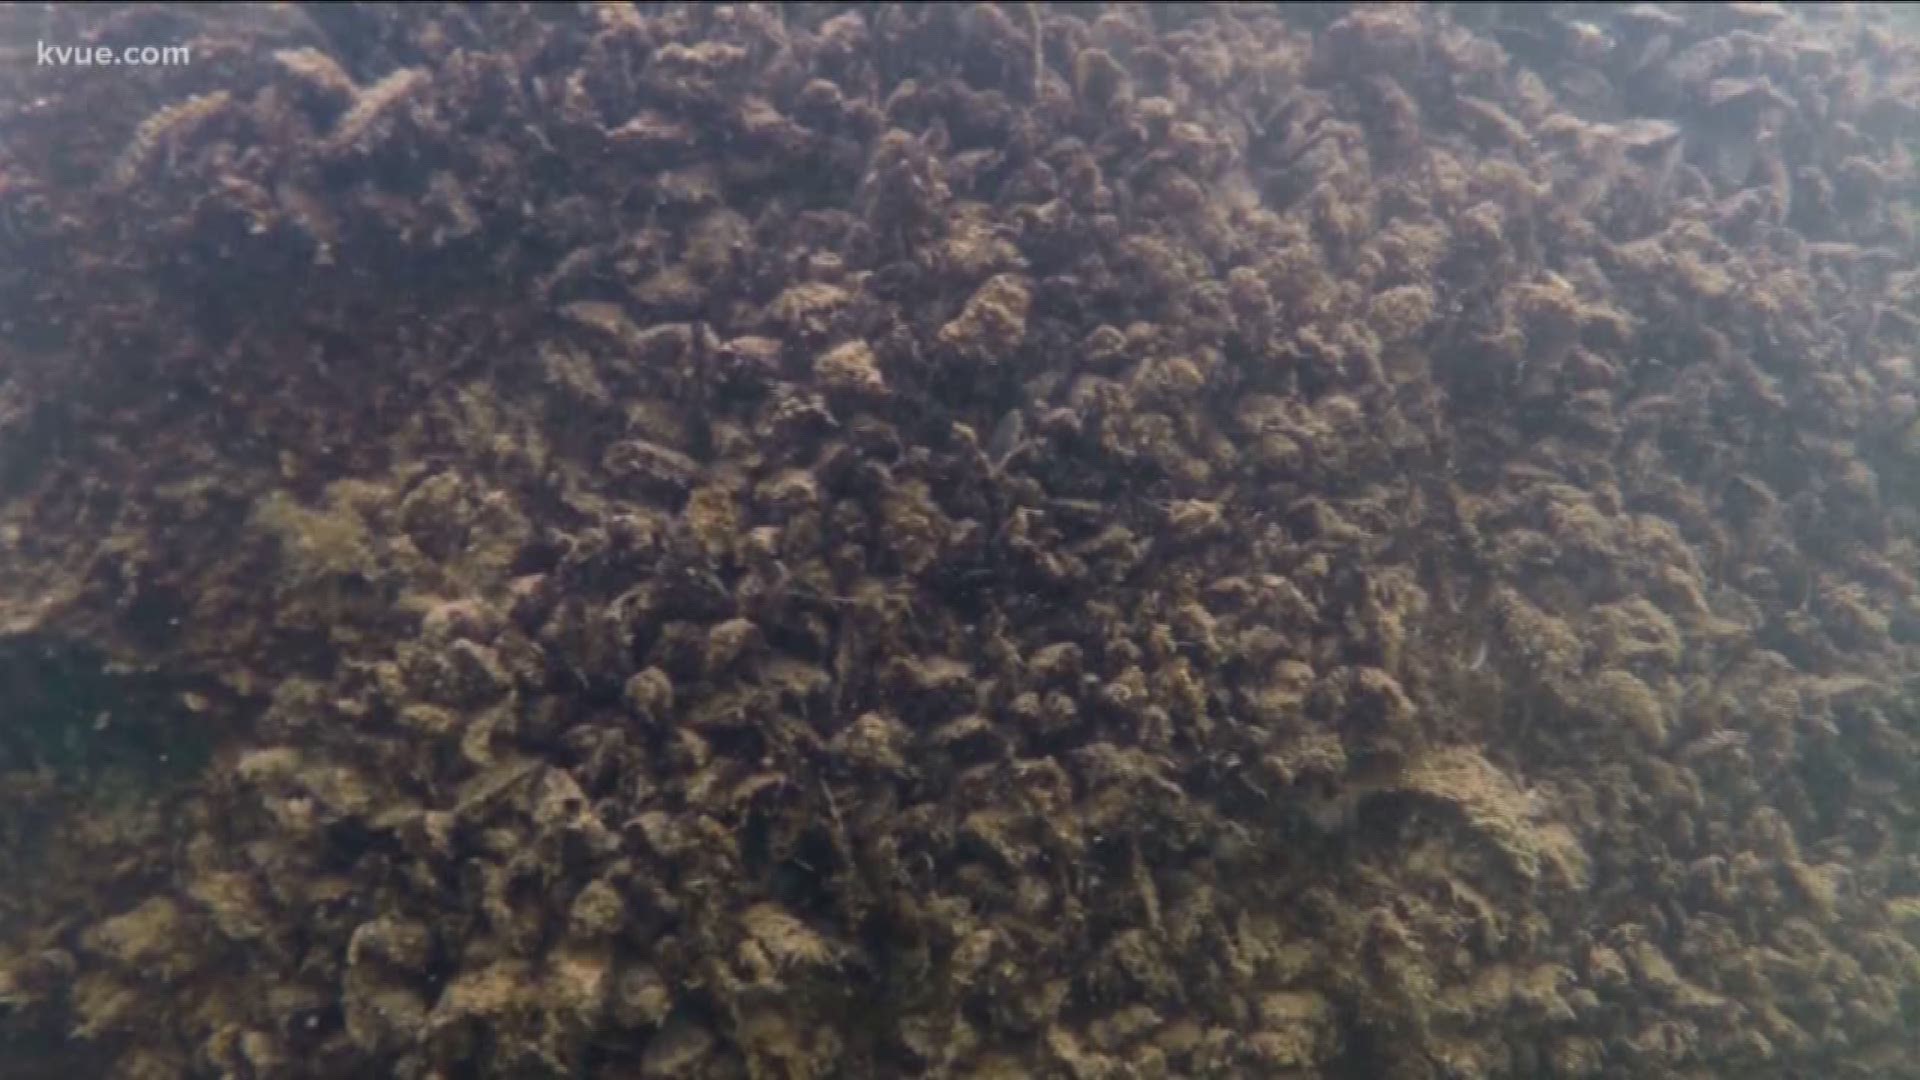 The invasive zebra mussels have plagued Austin waters. Is there any way to stop them?